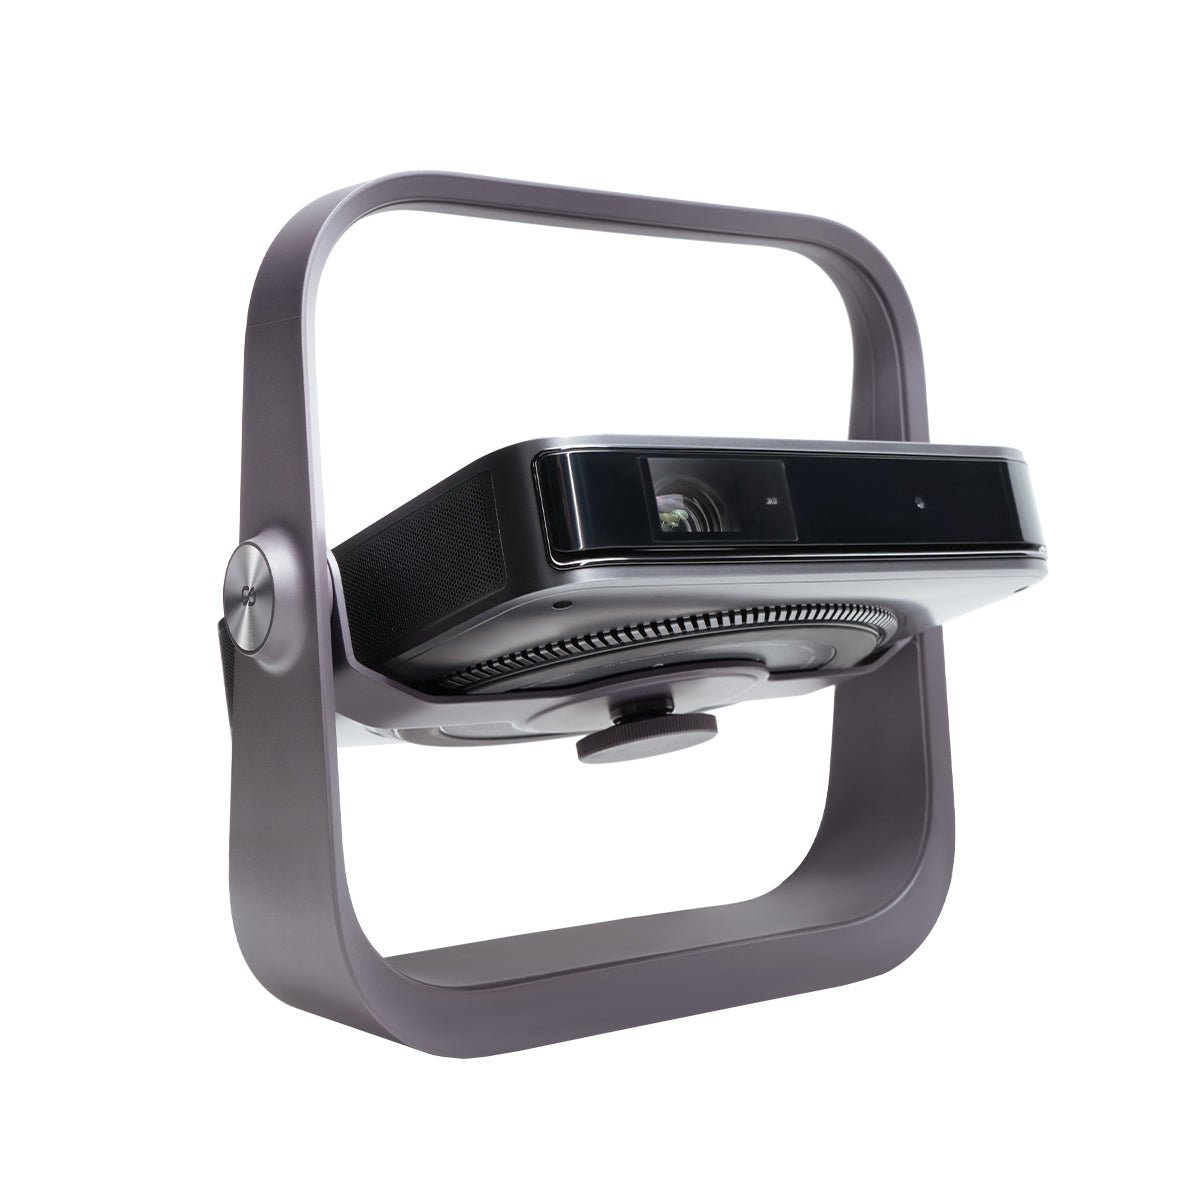 NothingProjector Picture Frame Head Stand Multi-Angle Stand For Projector - Nothingprojector